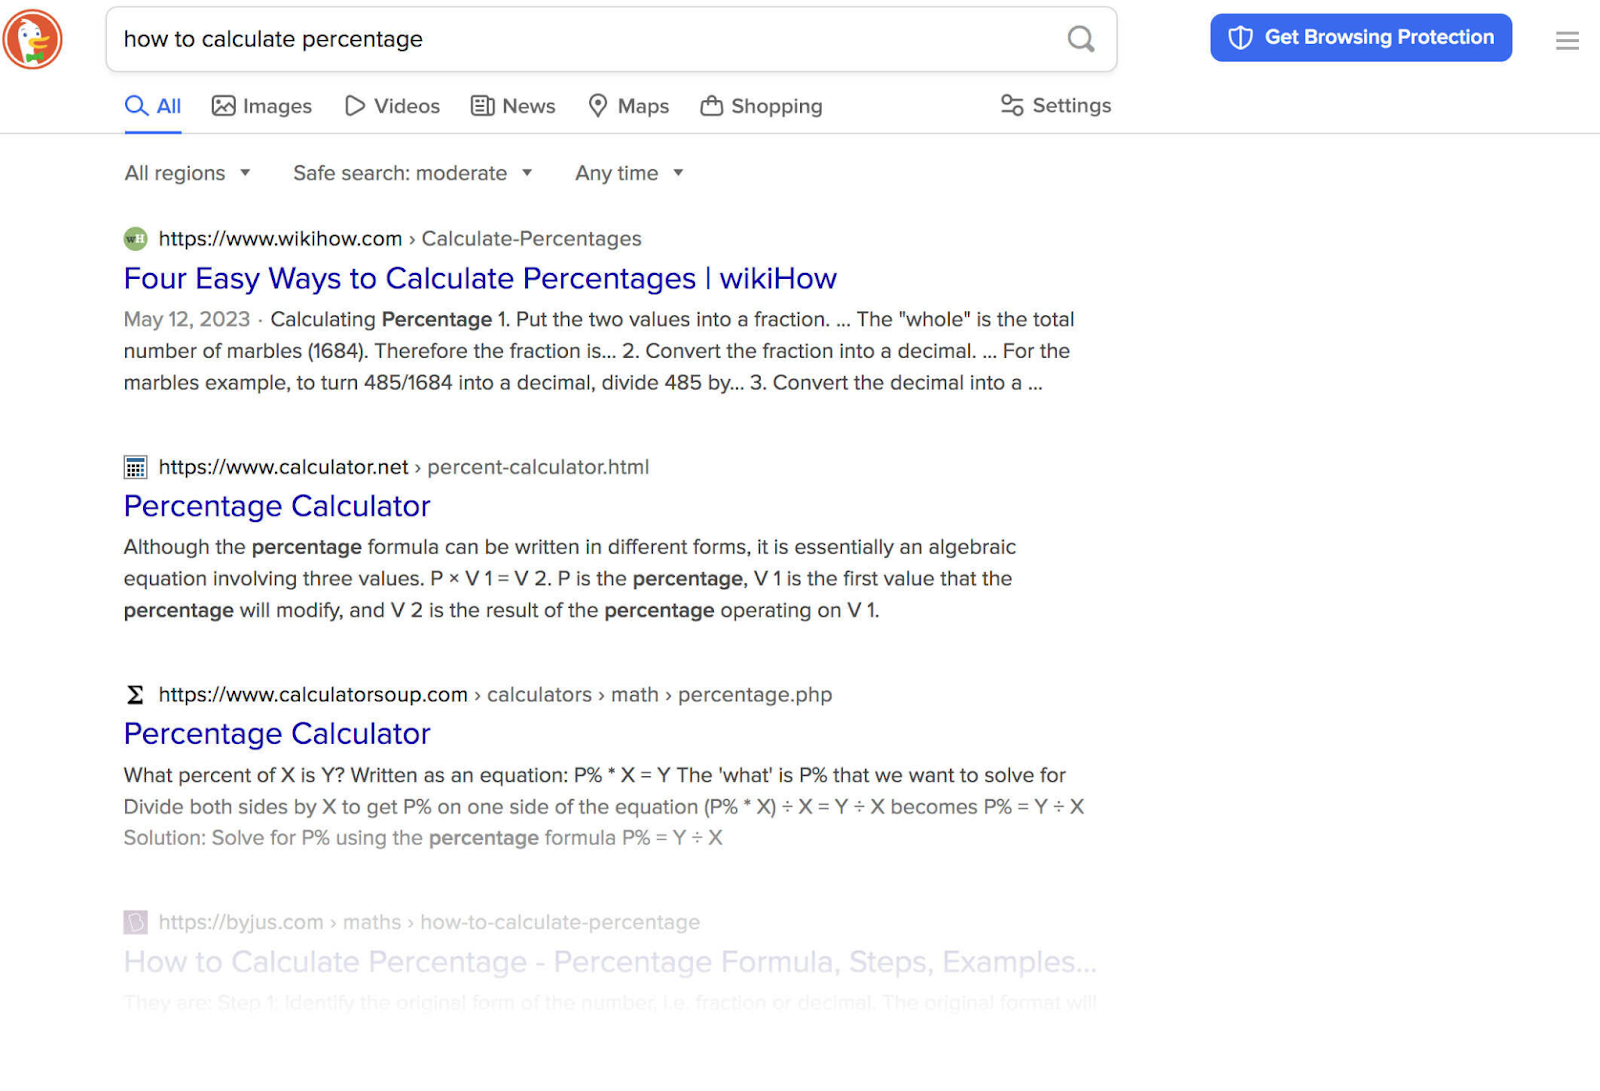 DuckDuckGo’s search results for "how to calculate percentage"